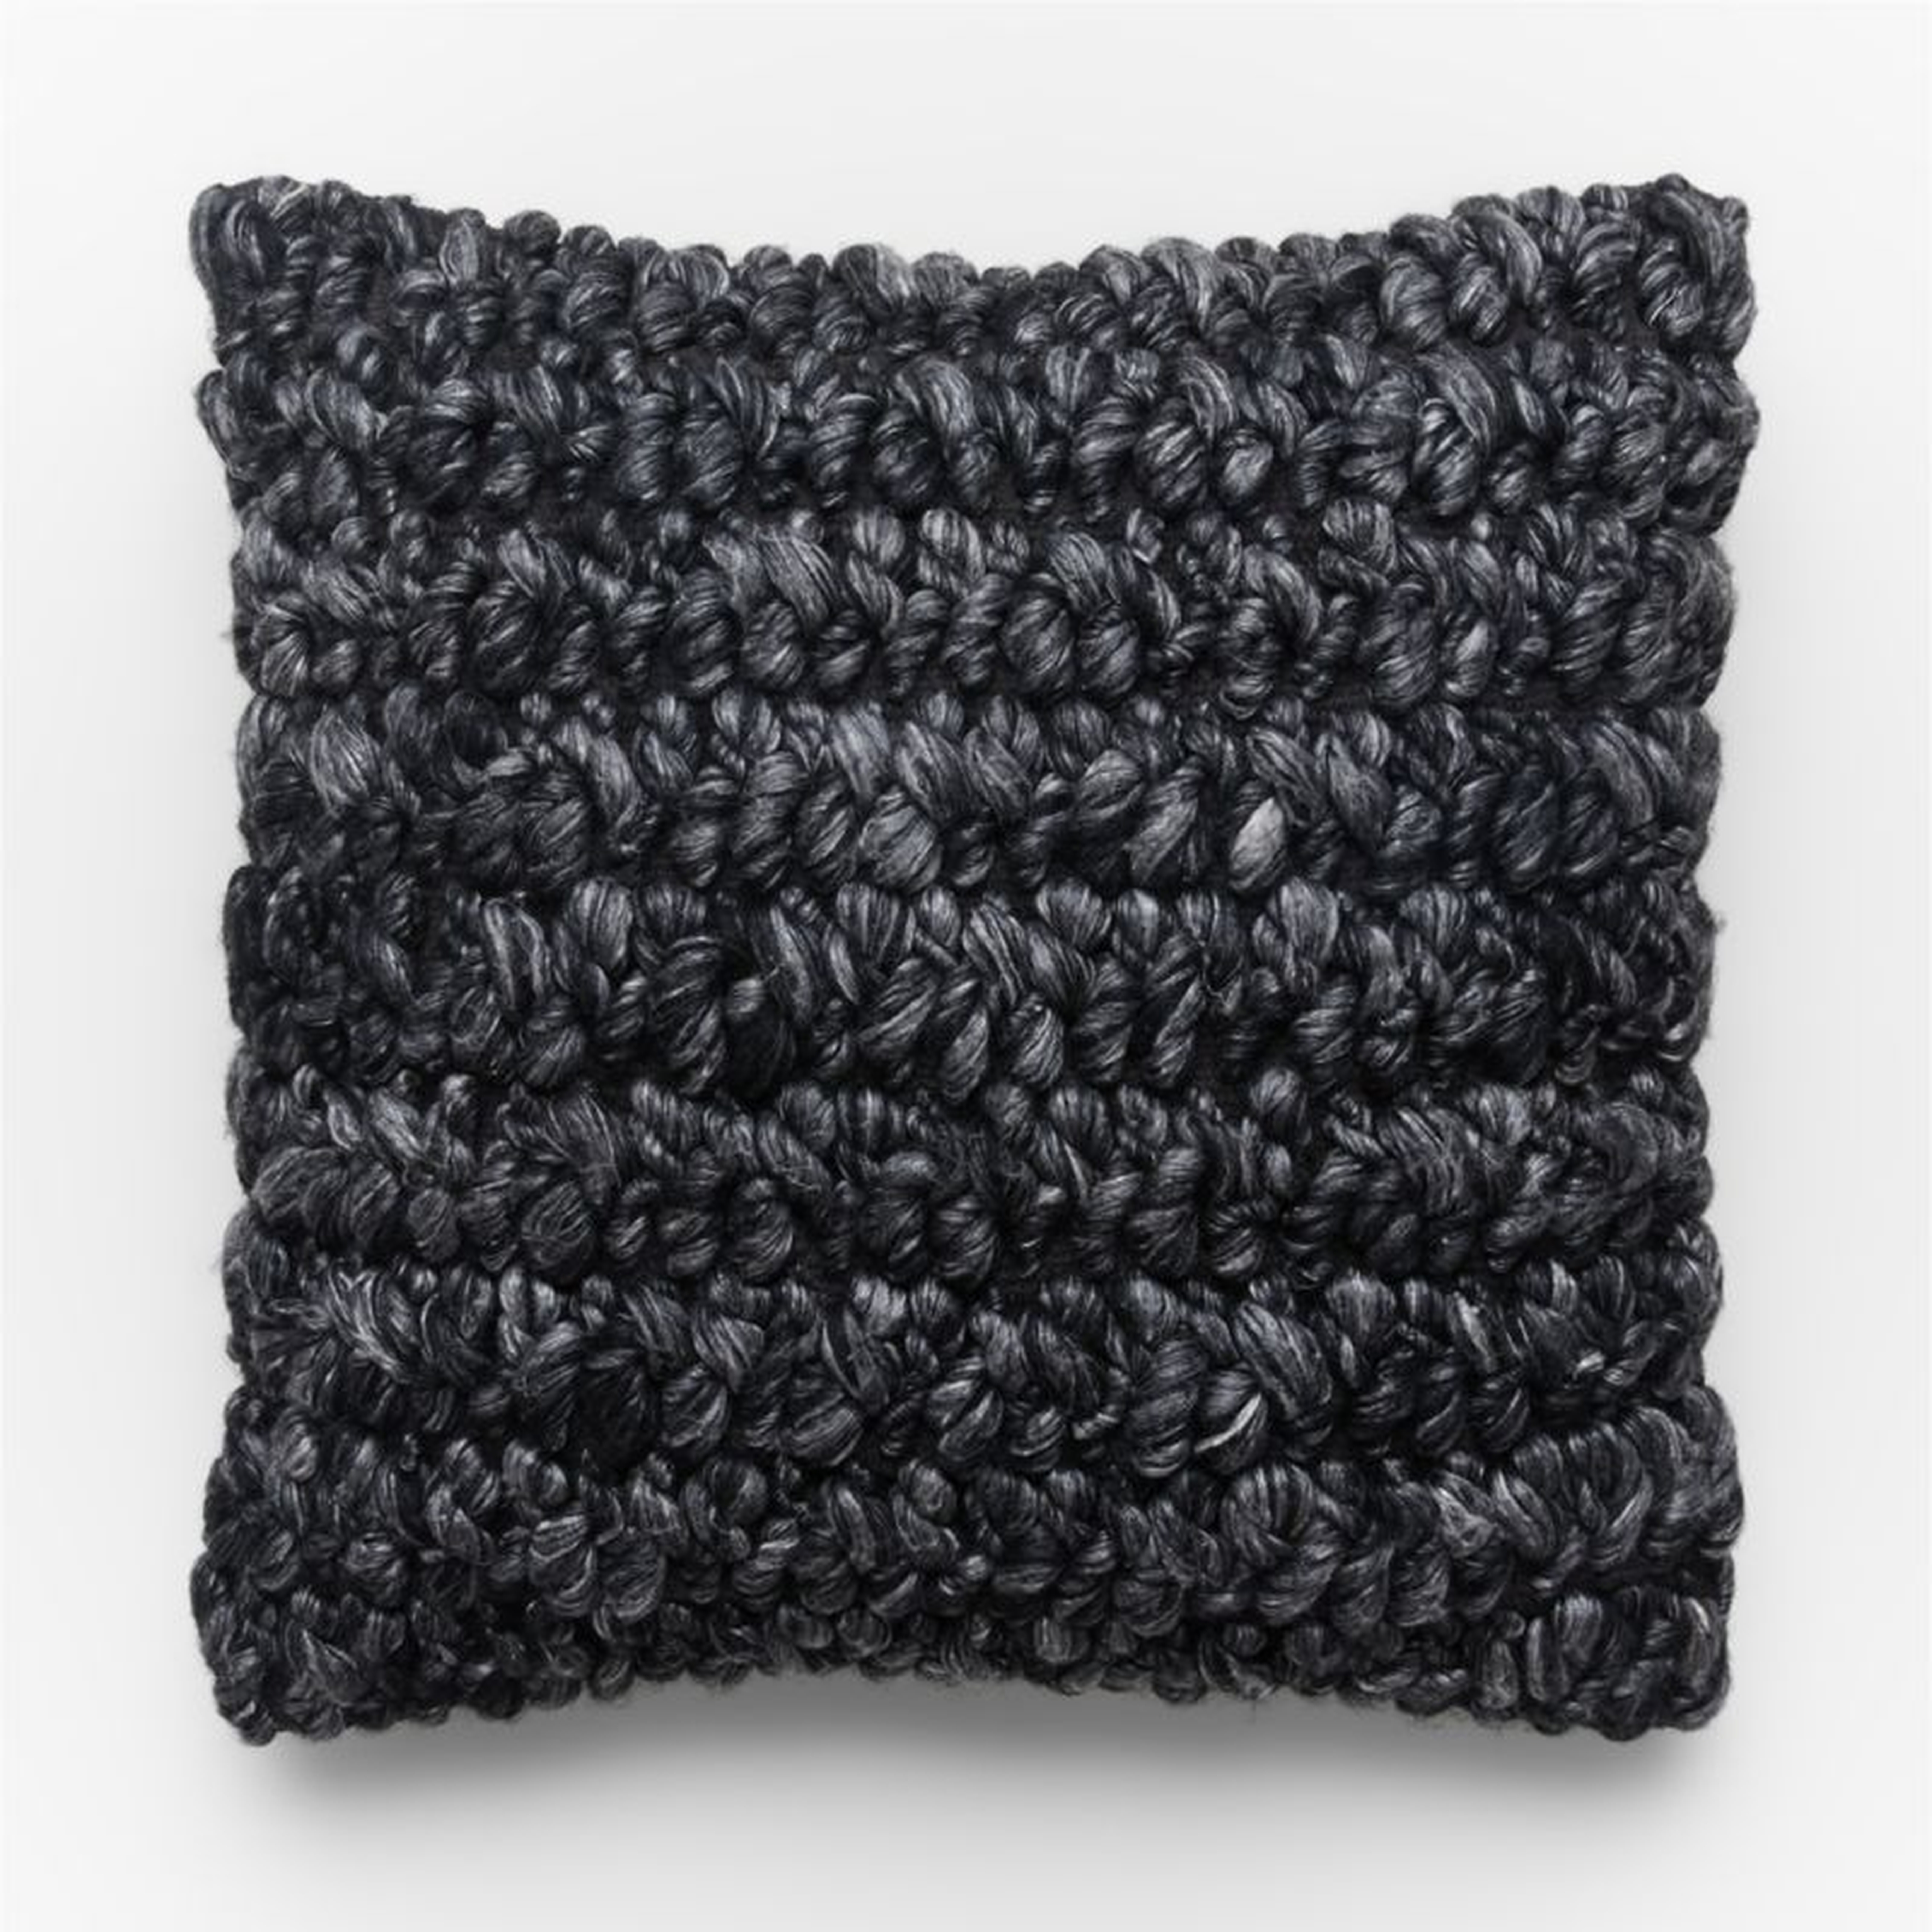 Tillie Black Wool Throw Pillow with Feather-Down Insert 20" - CB2